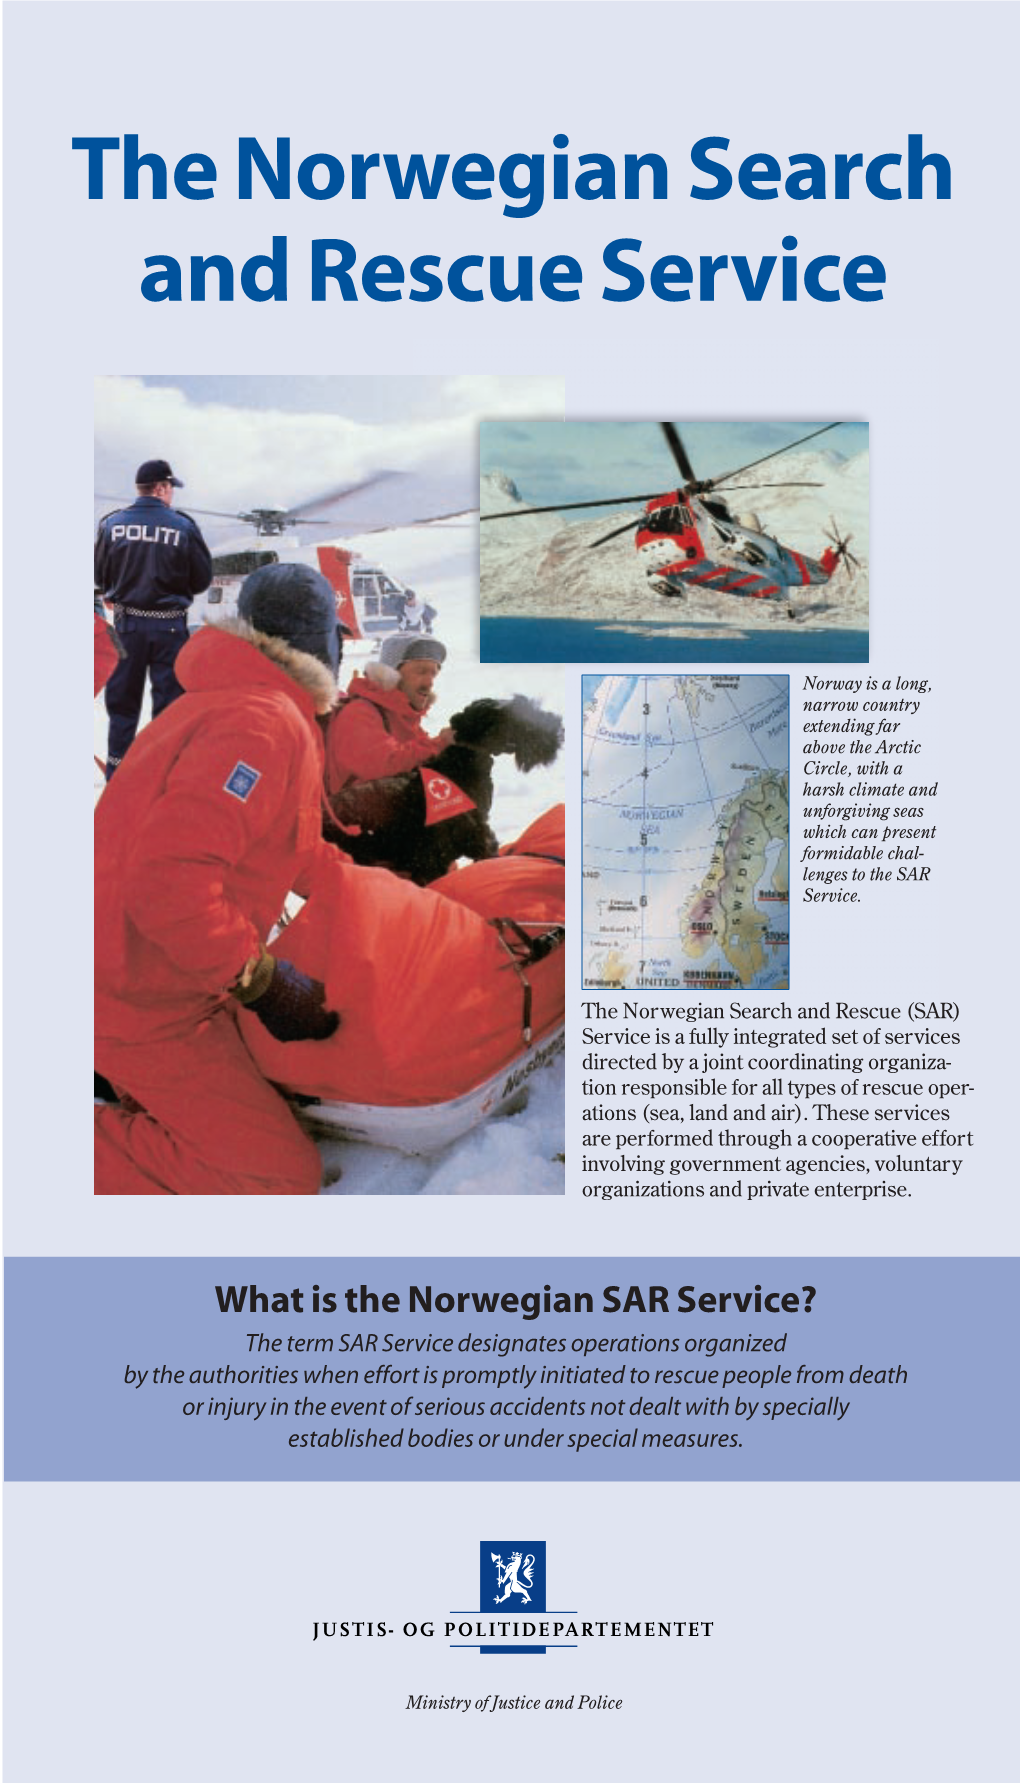 The Norwegian Search and Rescue Service